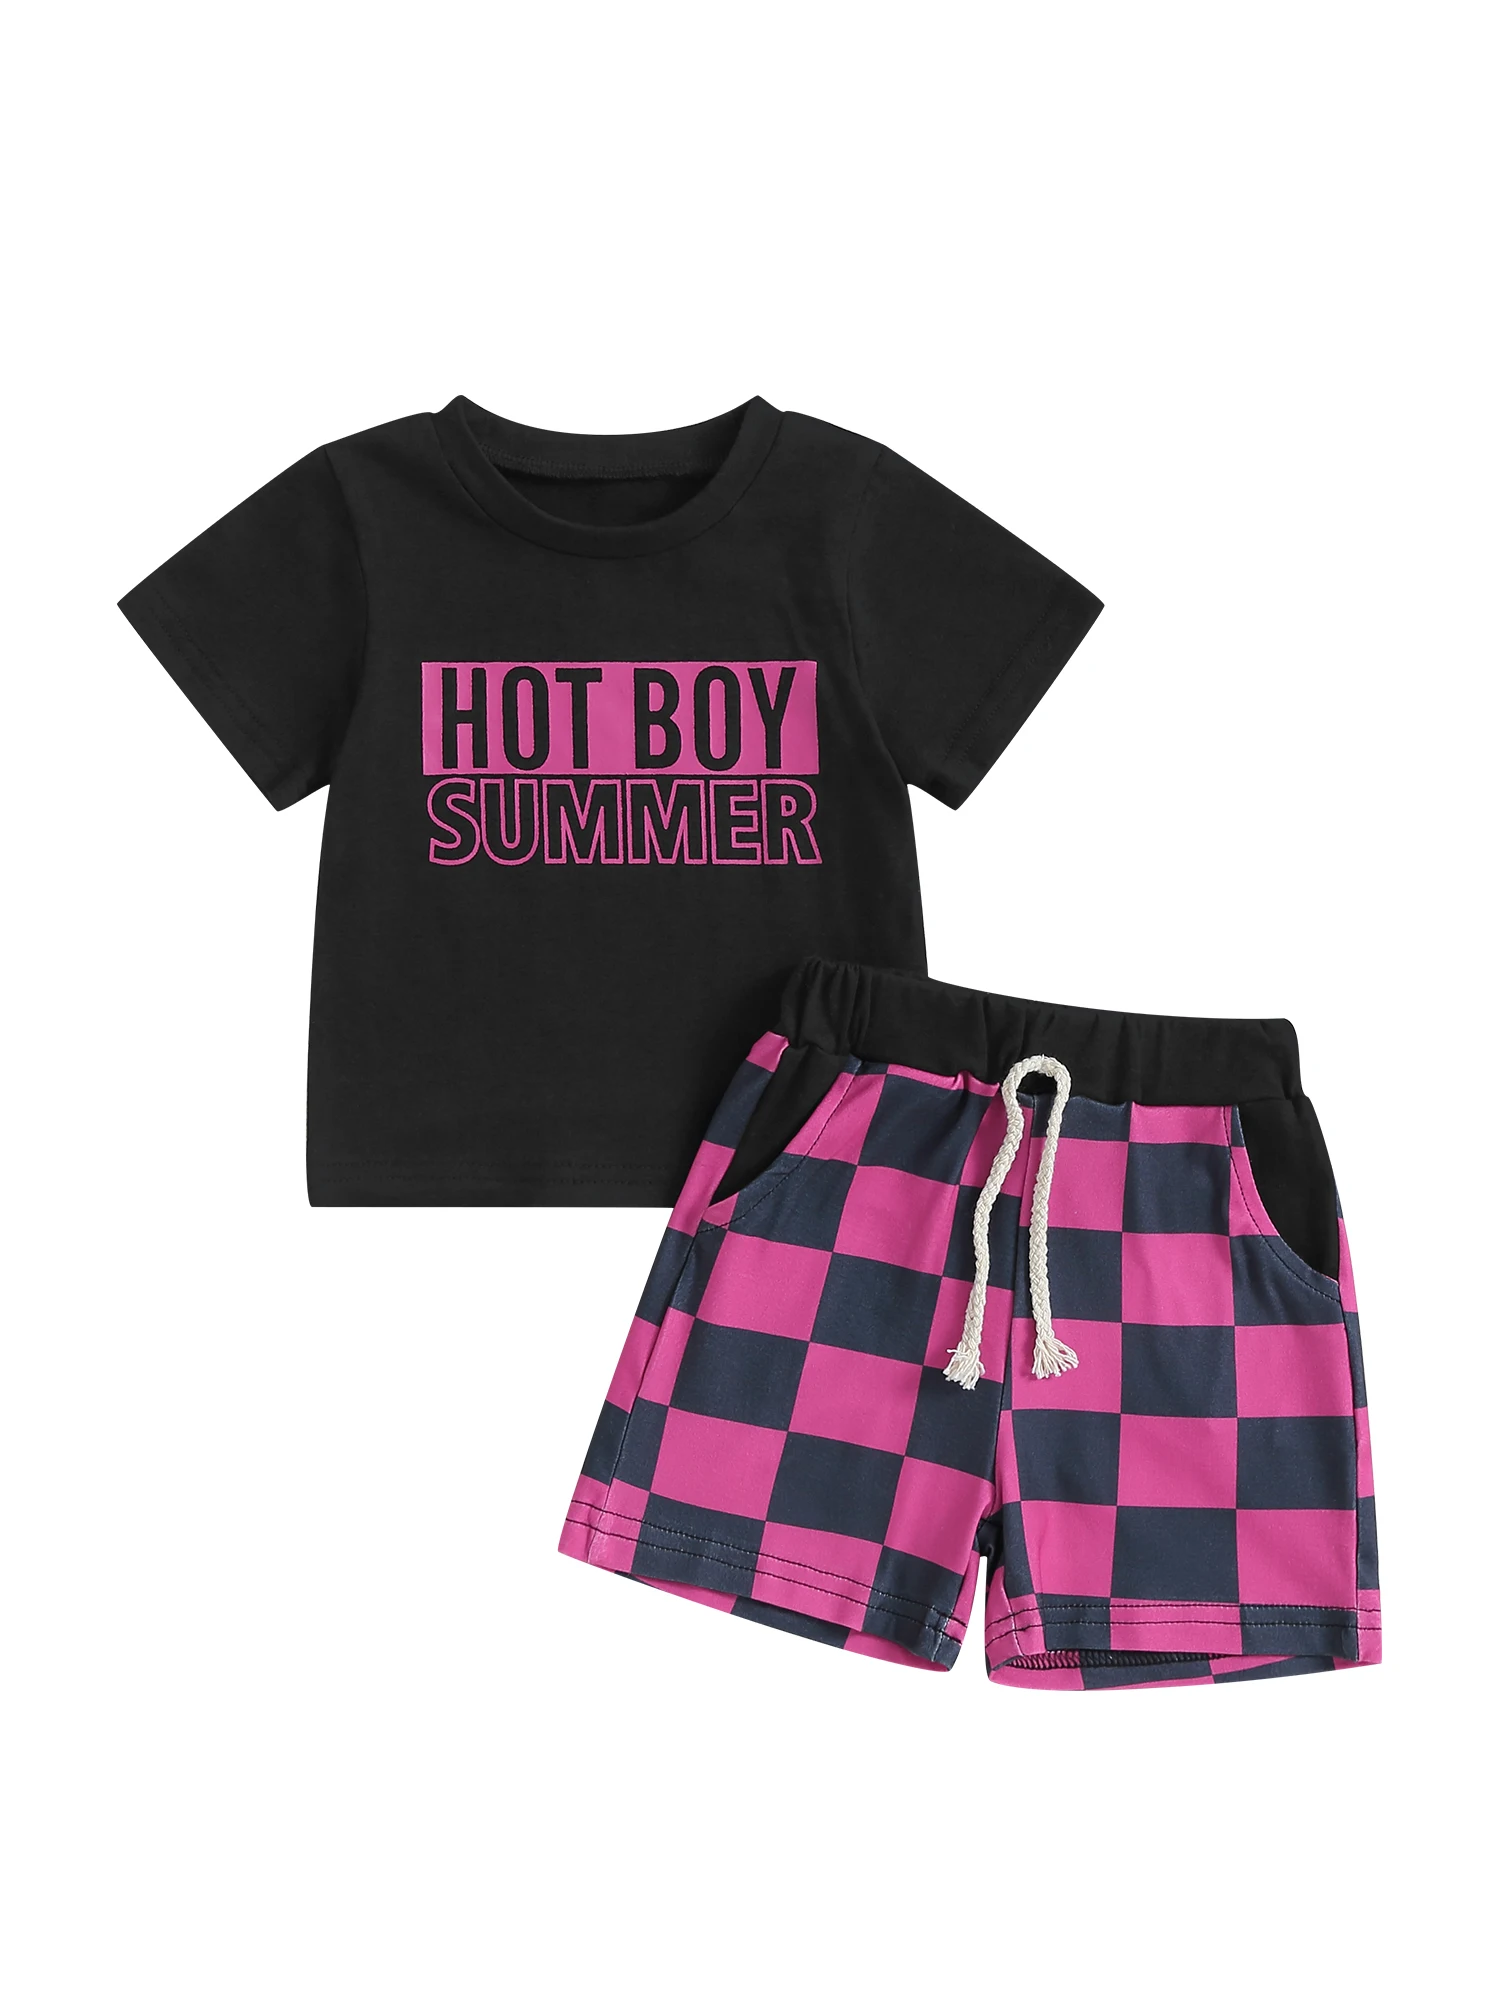 

Adorable Baby Boys Summer Set with Letter Print T-Shirt and Checkerboard Shorts - Elastic Waistband for Comfort and Style